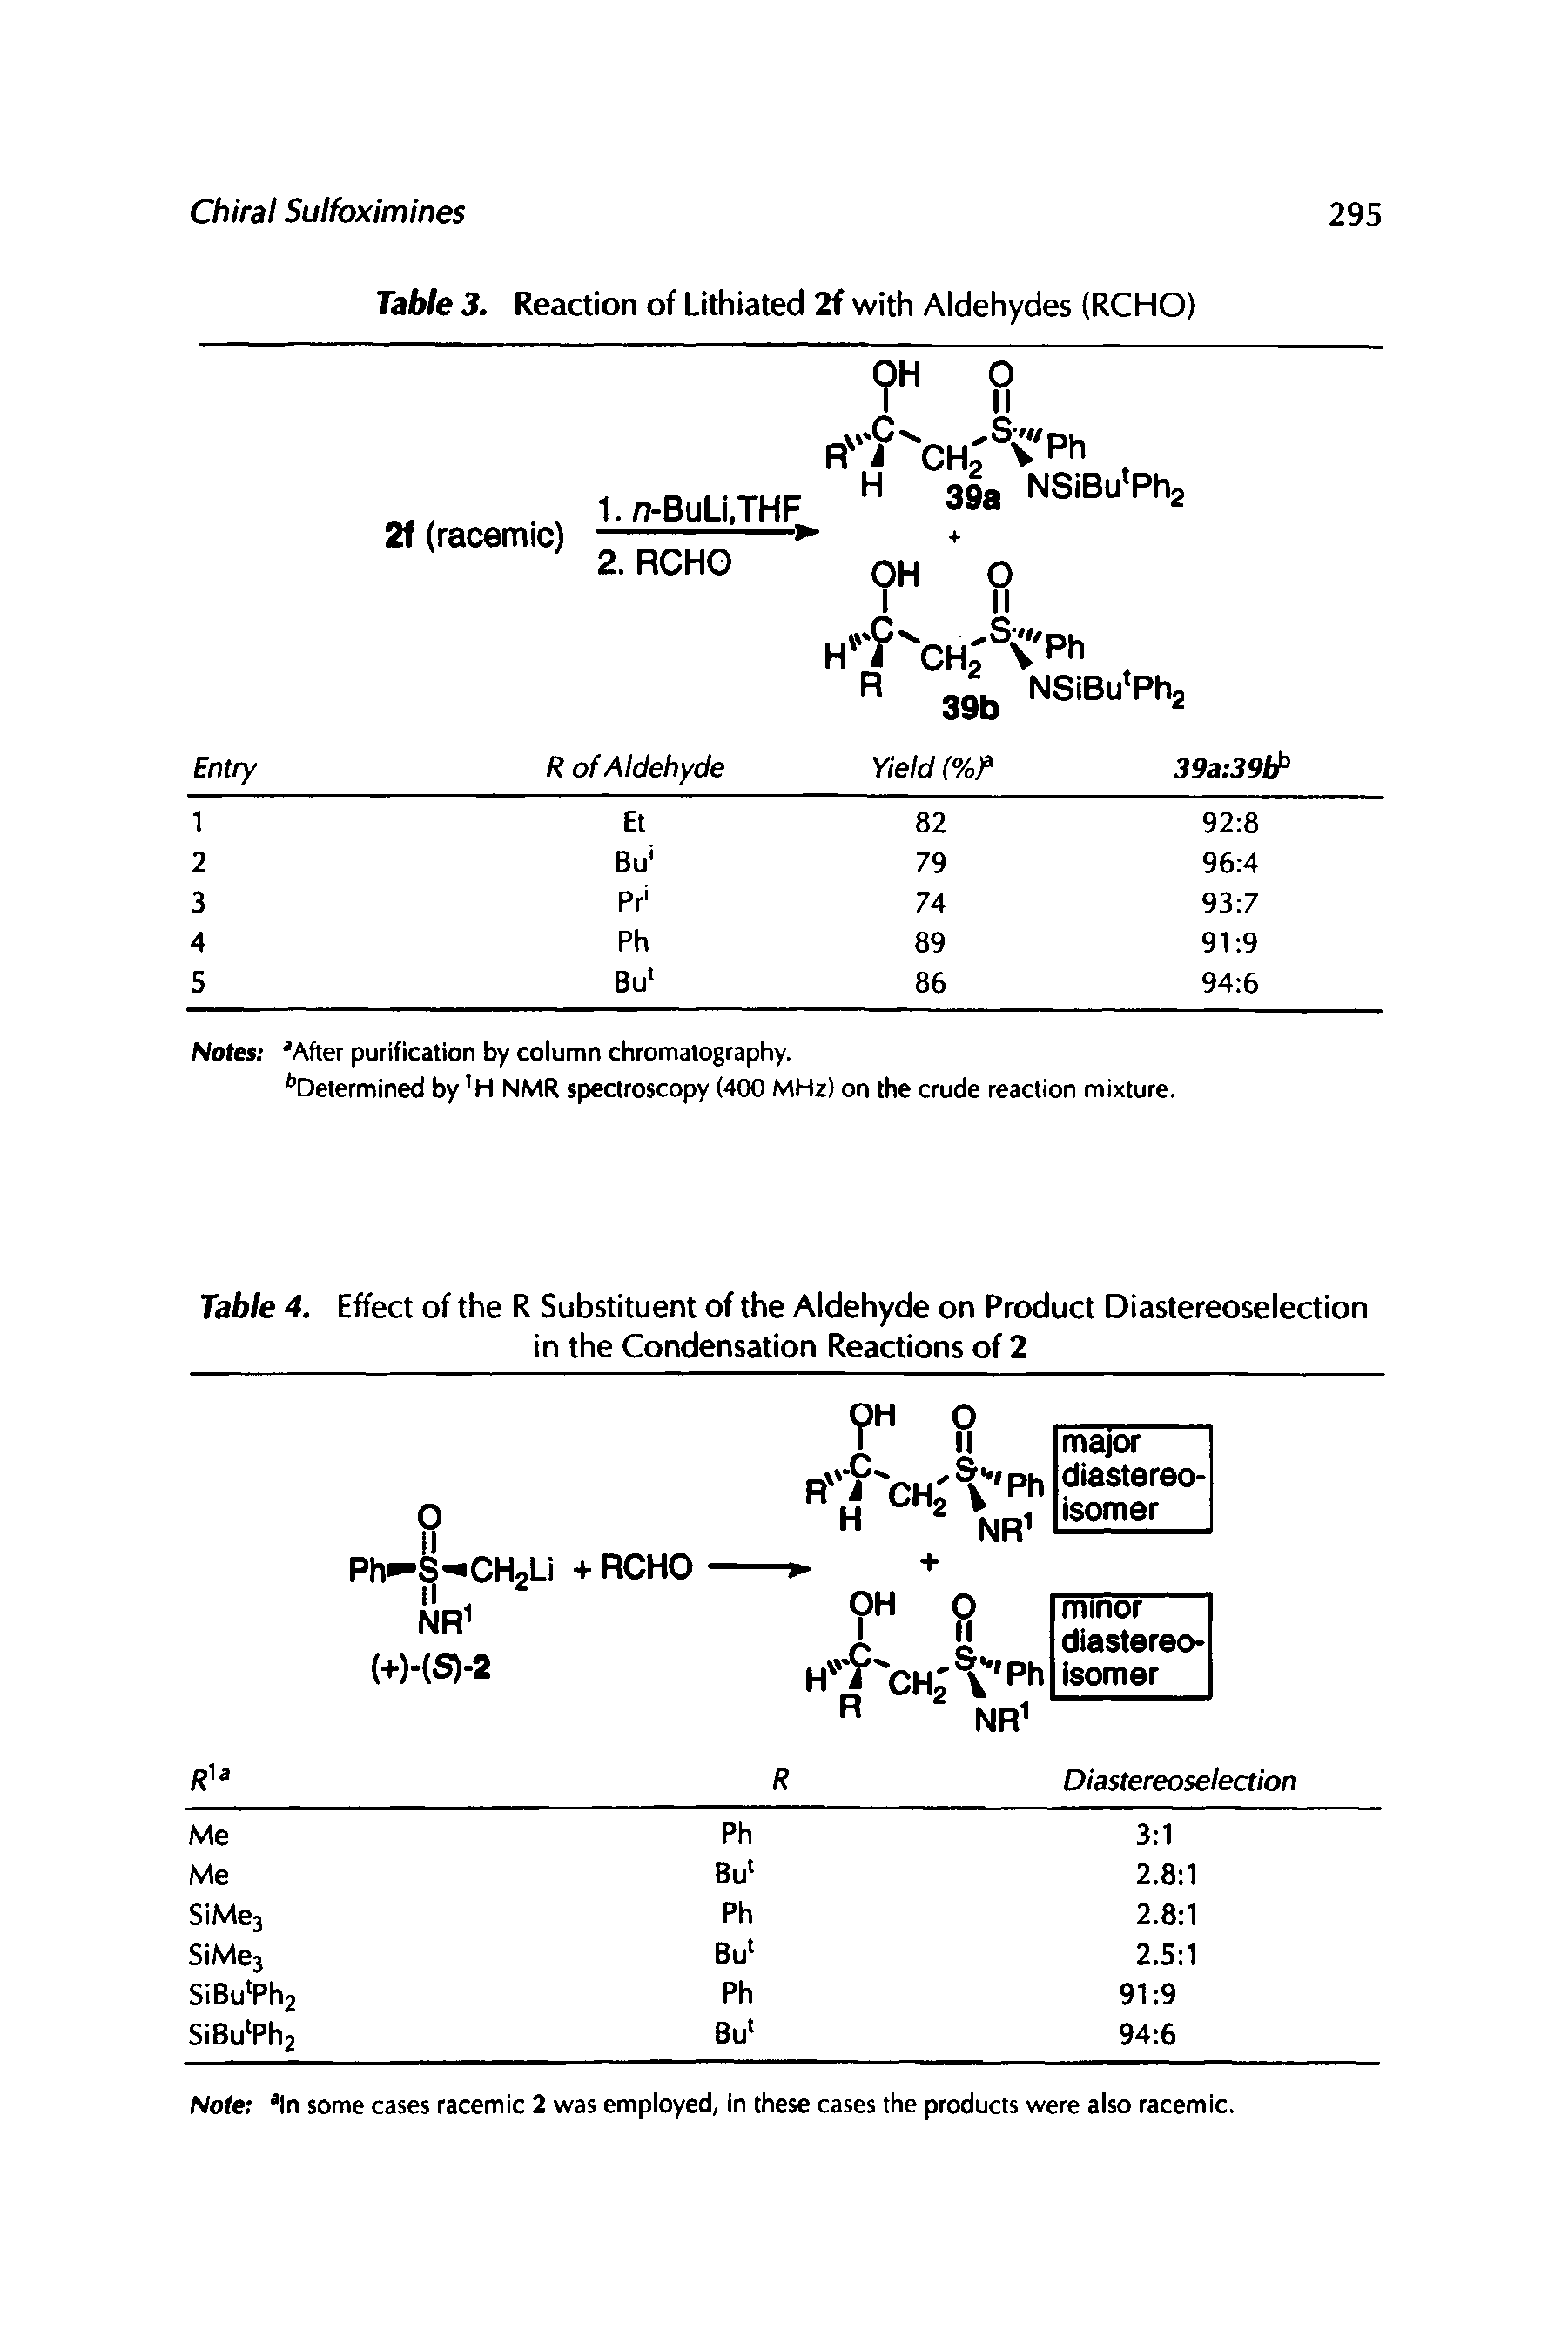 Table 4. Effect of the R Substituent of the Aldehyde on Product Diastereoselection in the Condensation Reactions of 2...